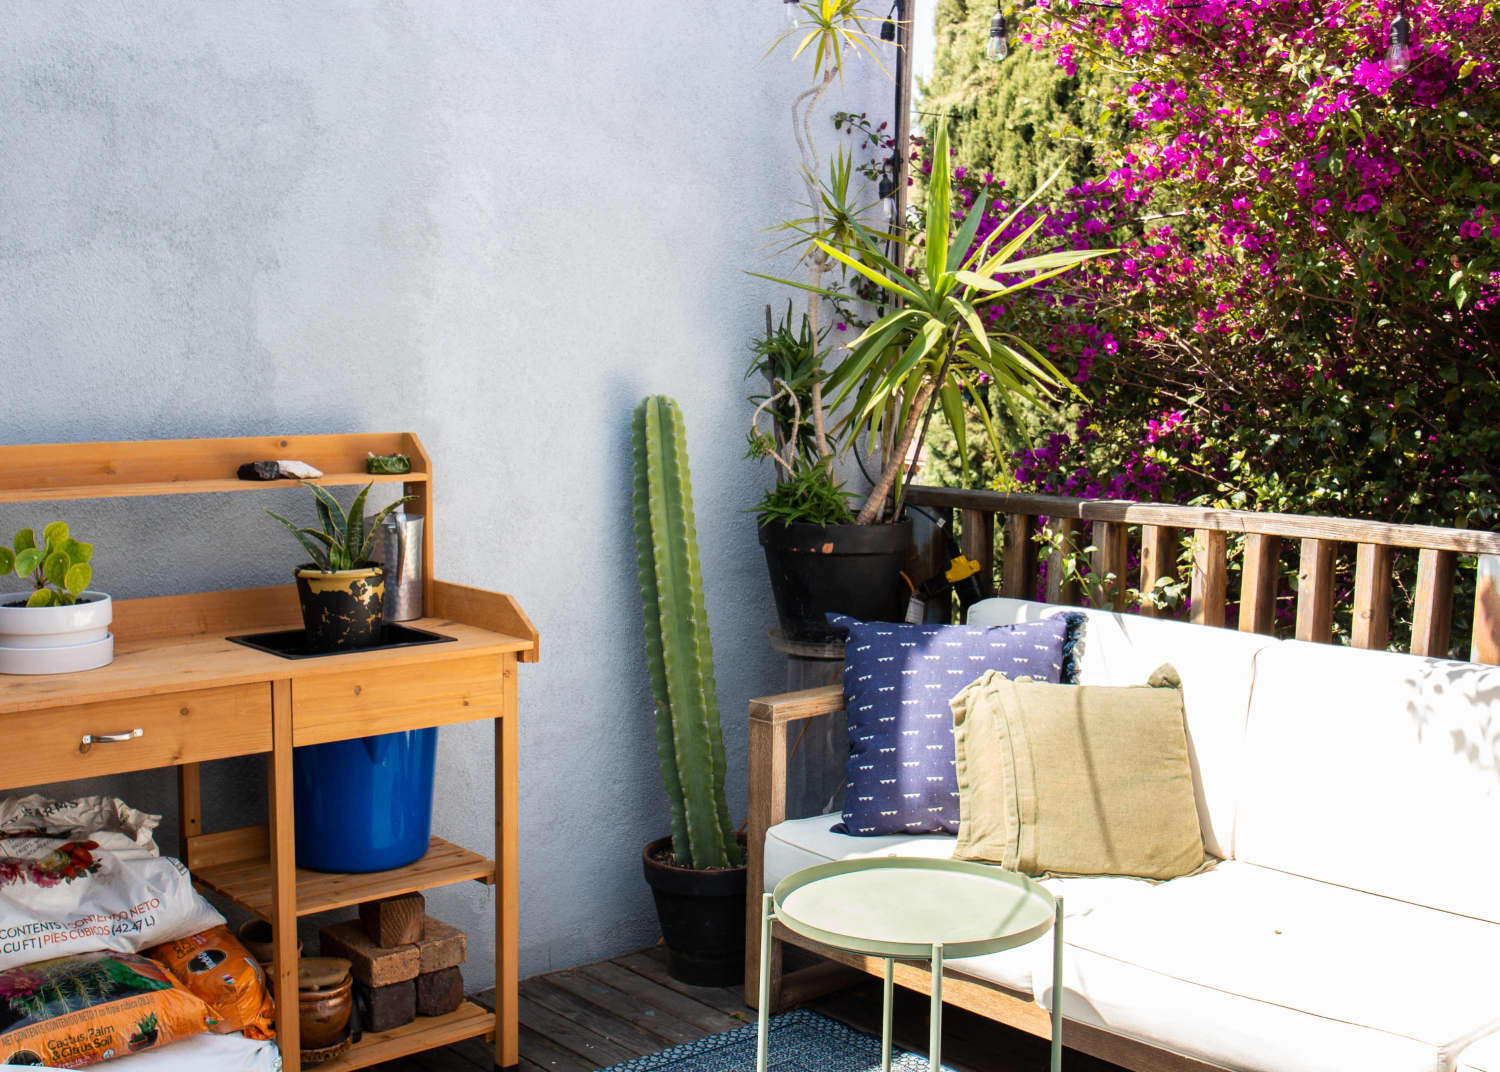 Wayfair’s Big Outdoor Sale Is Here — Shop These 10 Stylish Furniture and Decor Picks for Up to 50% Off